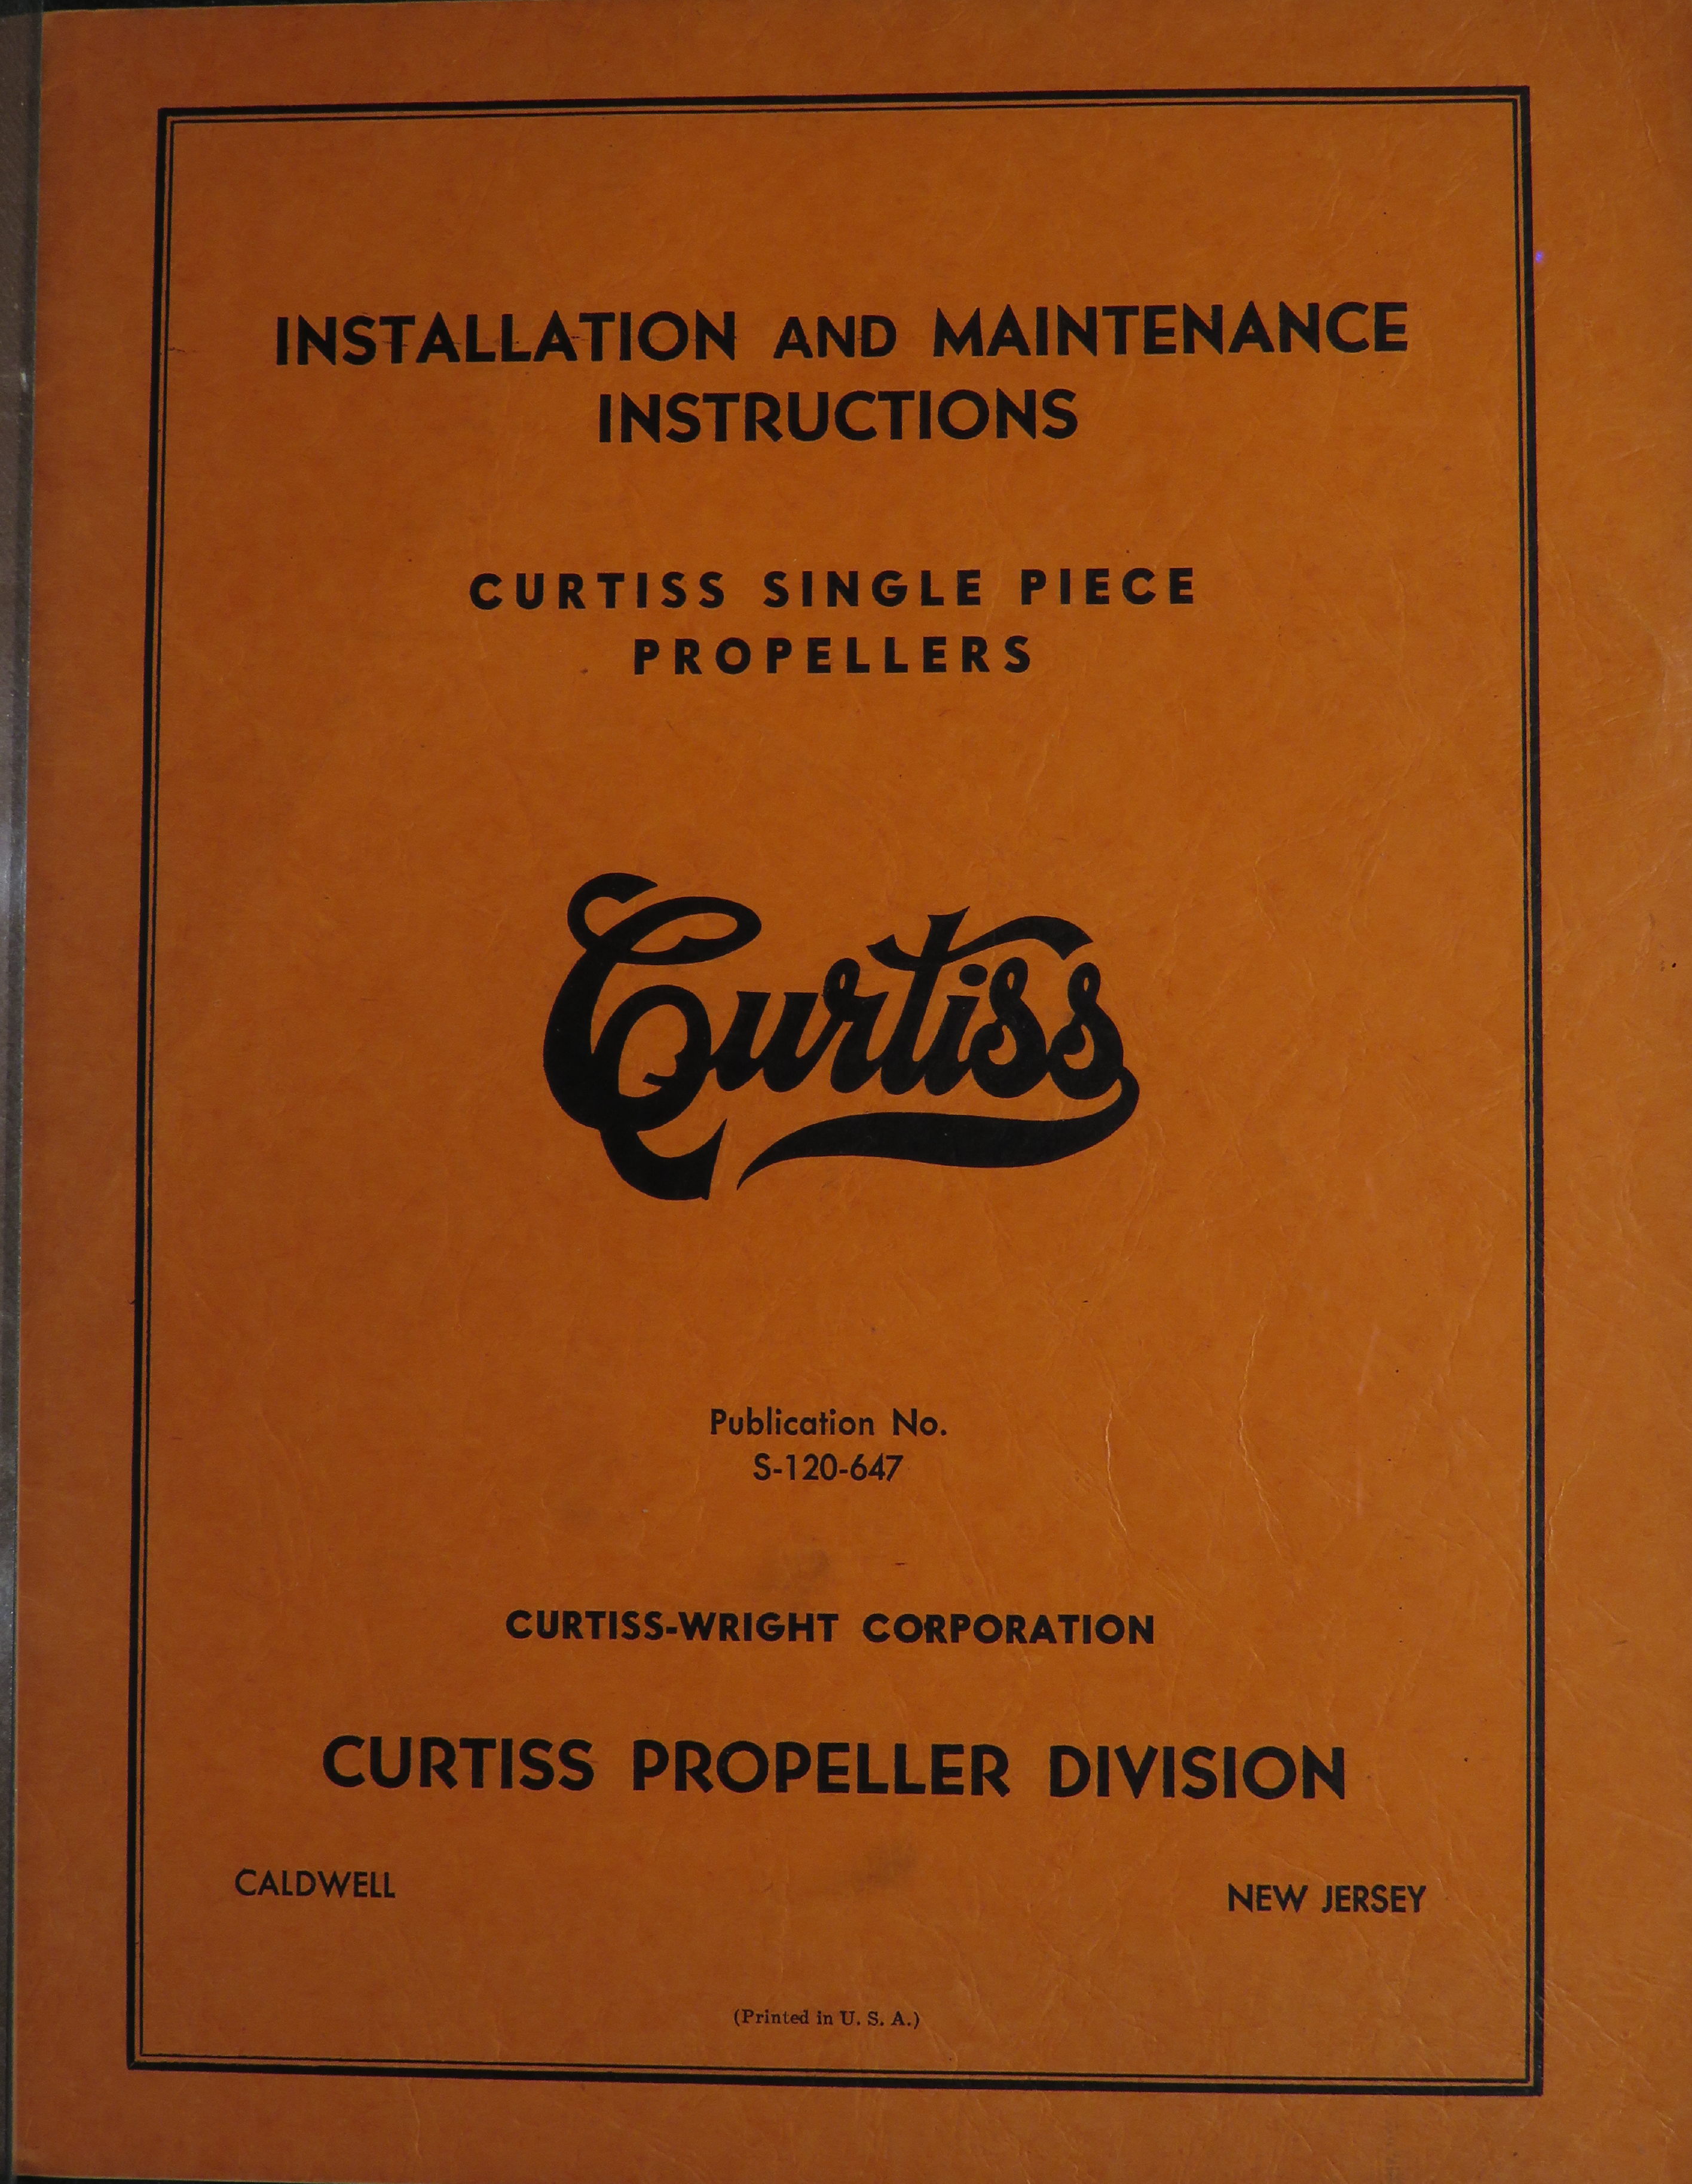 Sample page 1 from AirCorps Library document: Installation and Maintenance Instructions for Curtiss Single Piece Propellers